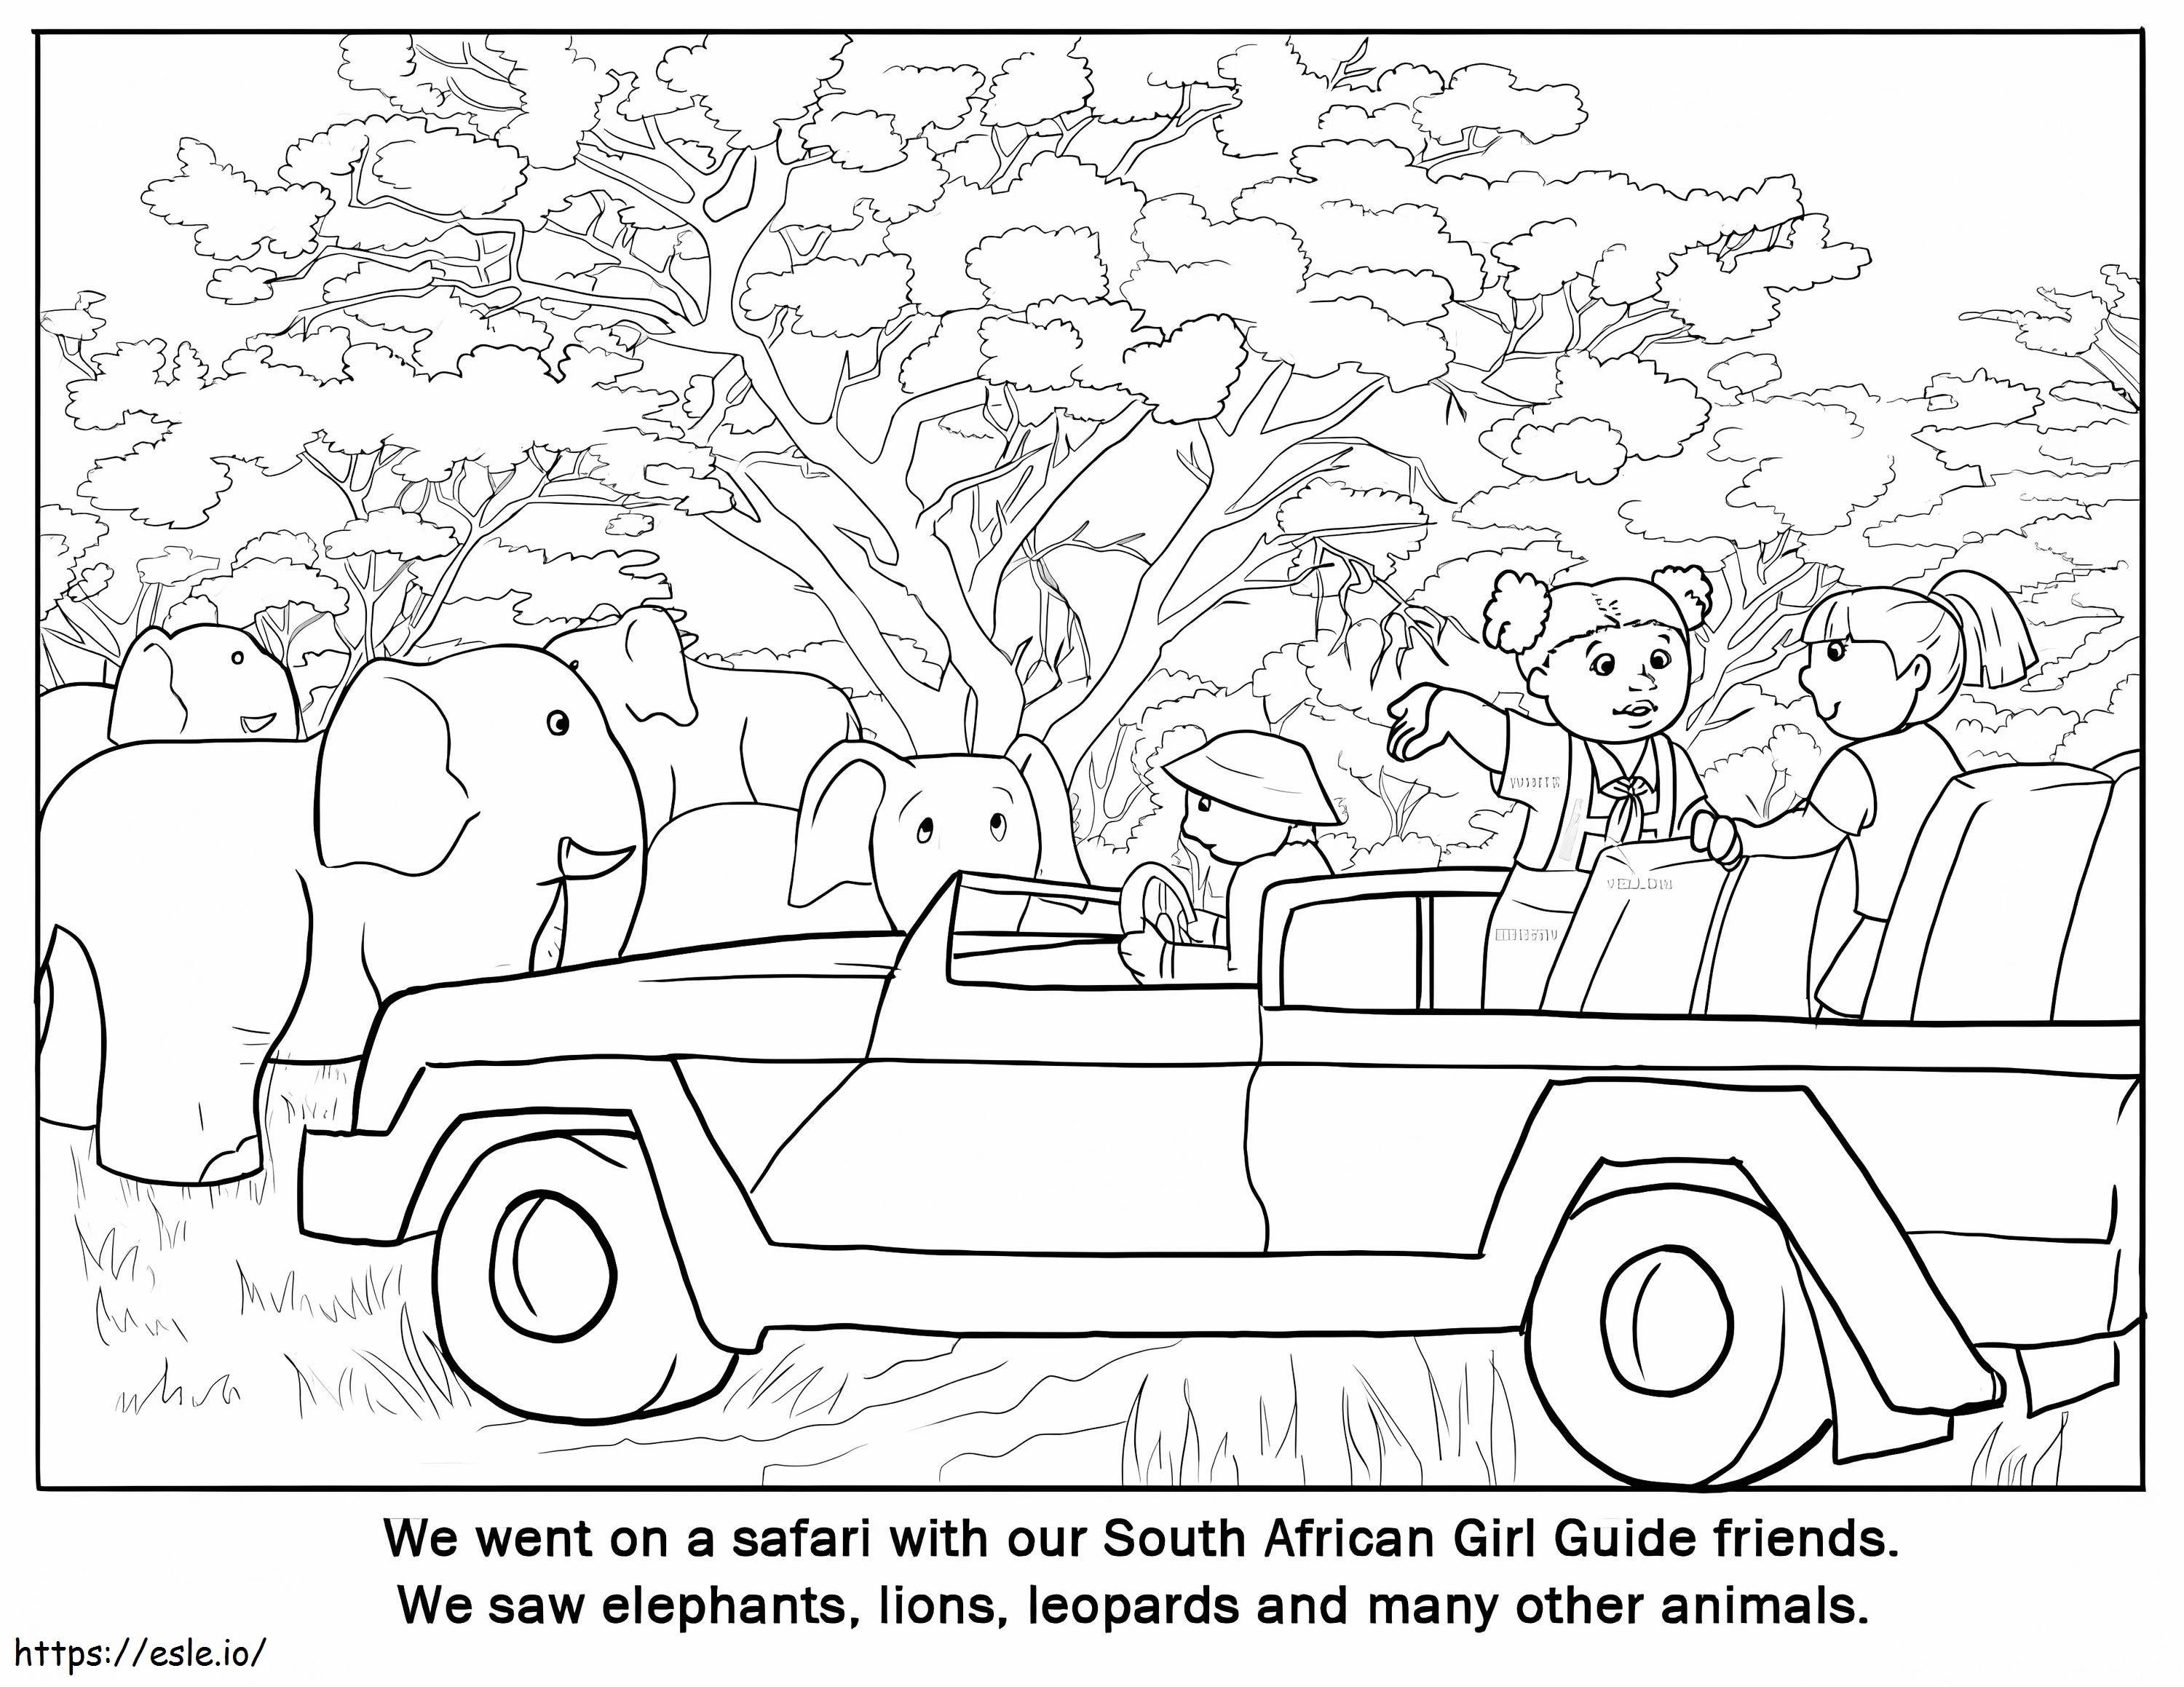 South Africa Safari coloring page